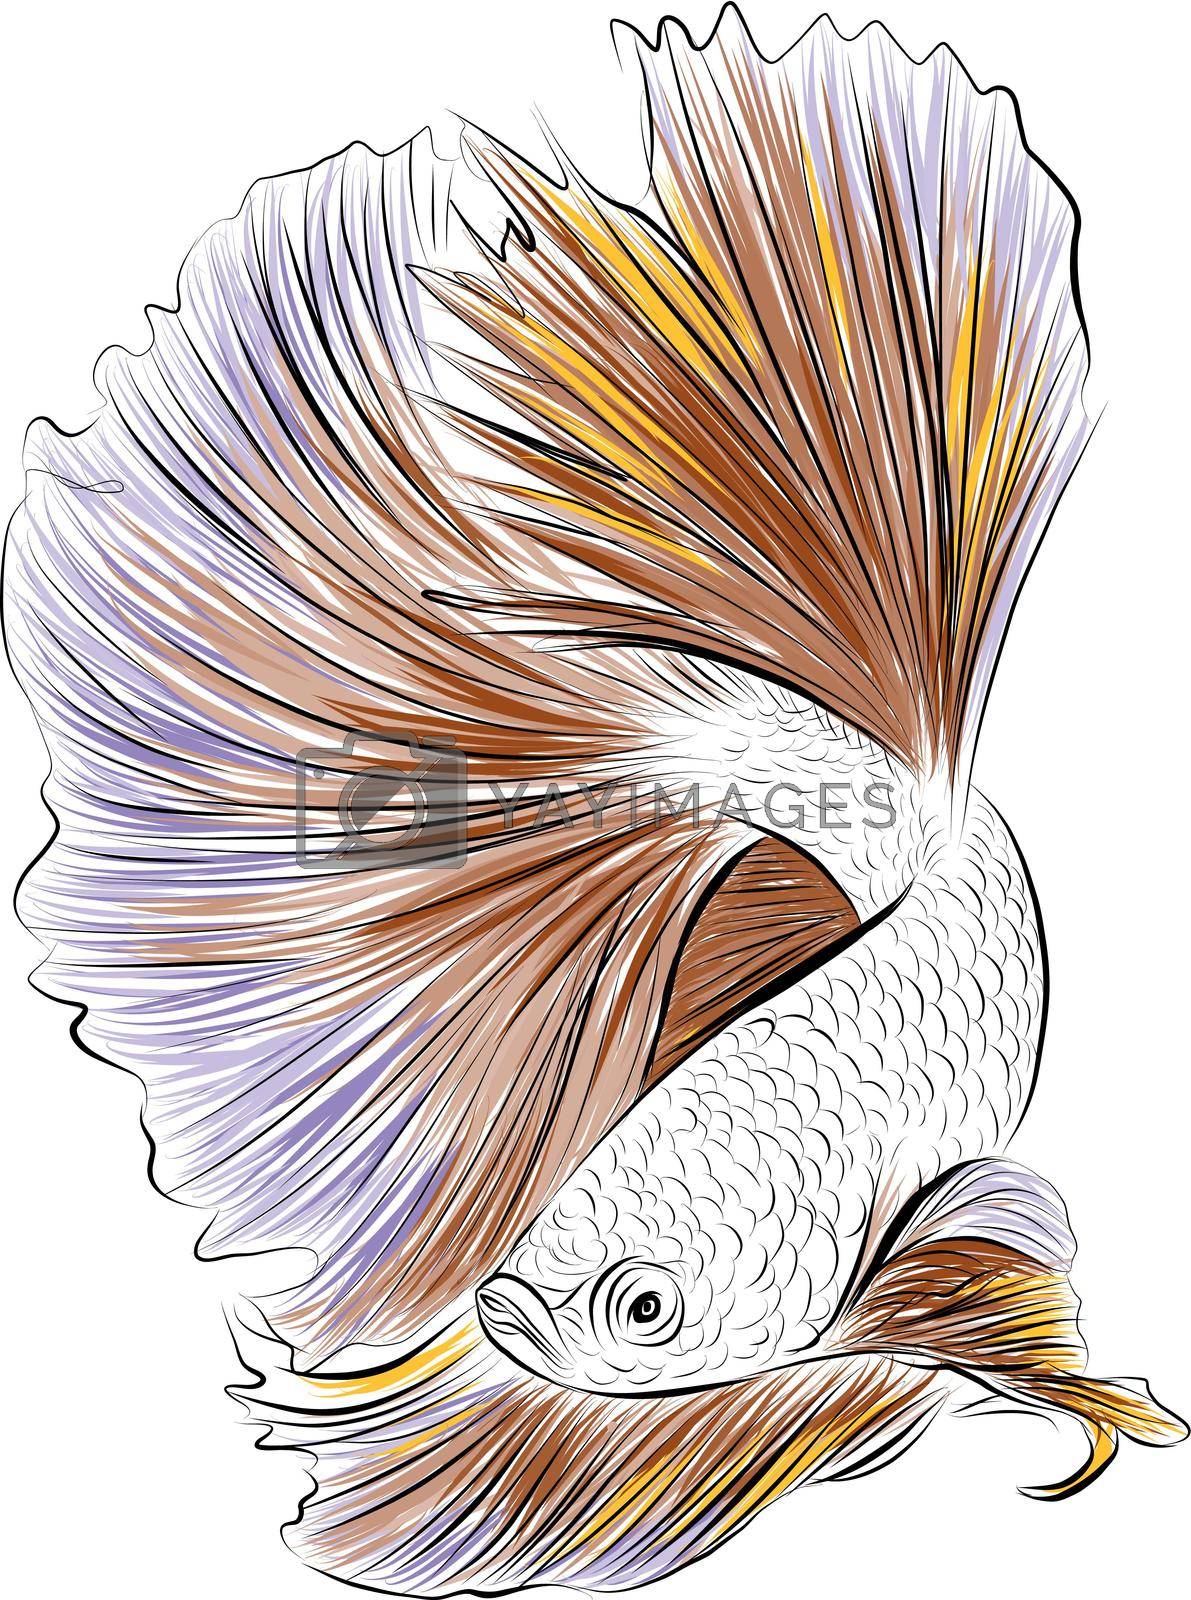 Royalty free image of Hand drawn sketch of siamese betta fish by aroas